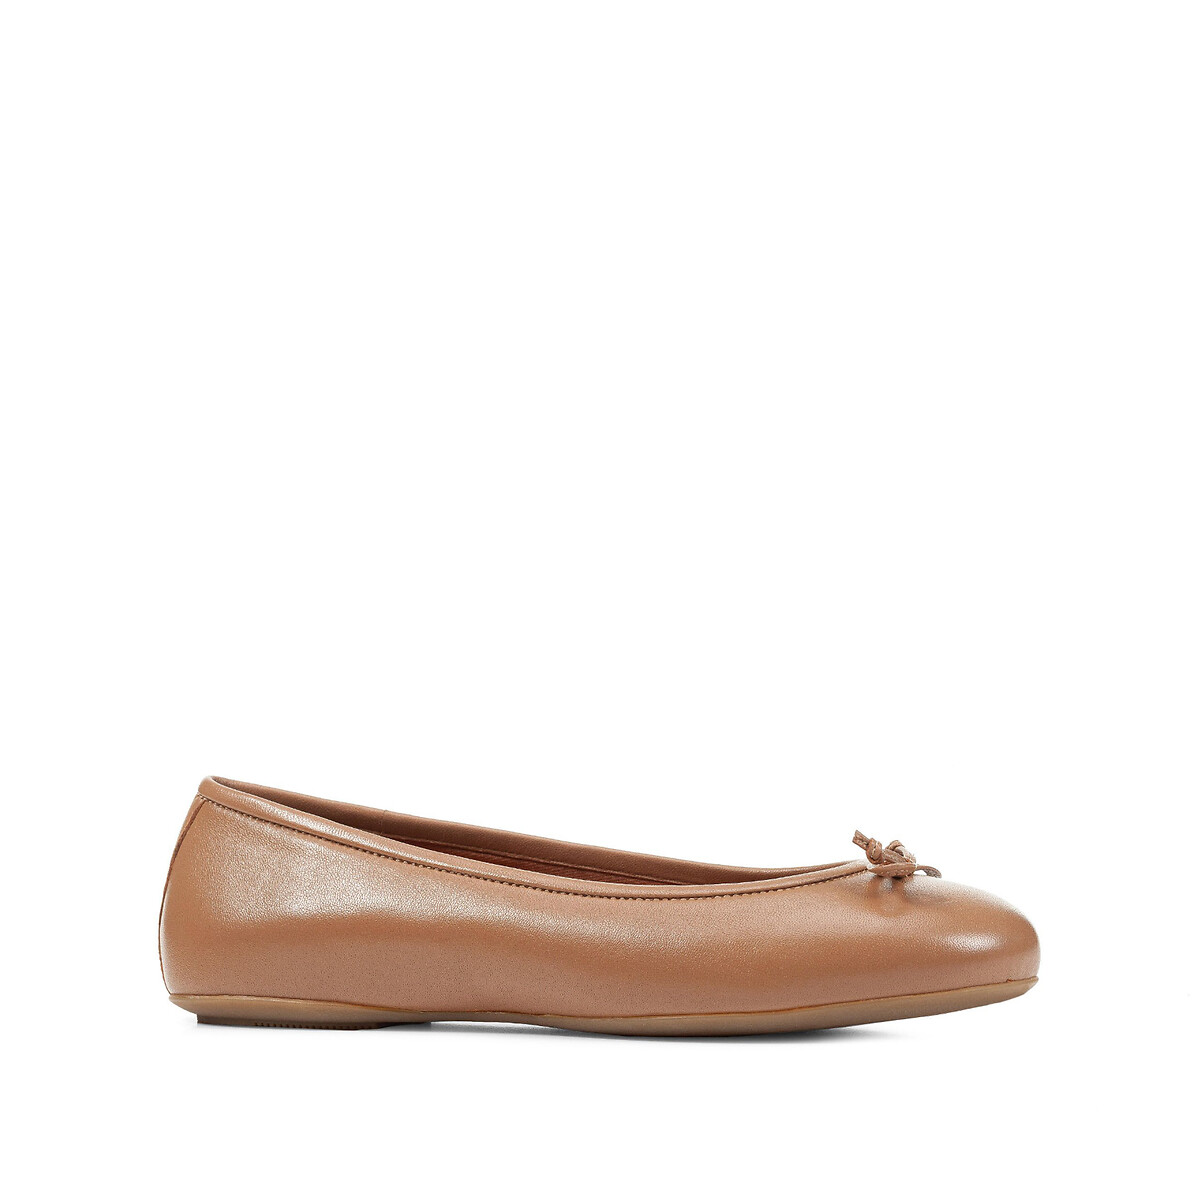 Image of Palmaria Breathable Ballet Flats in Leather